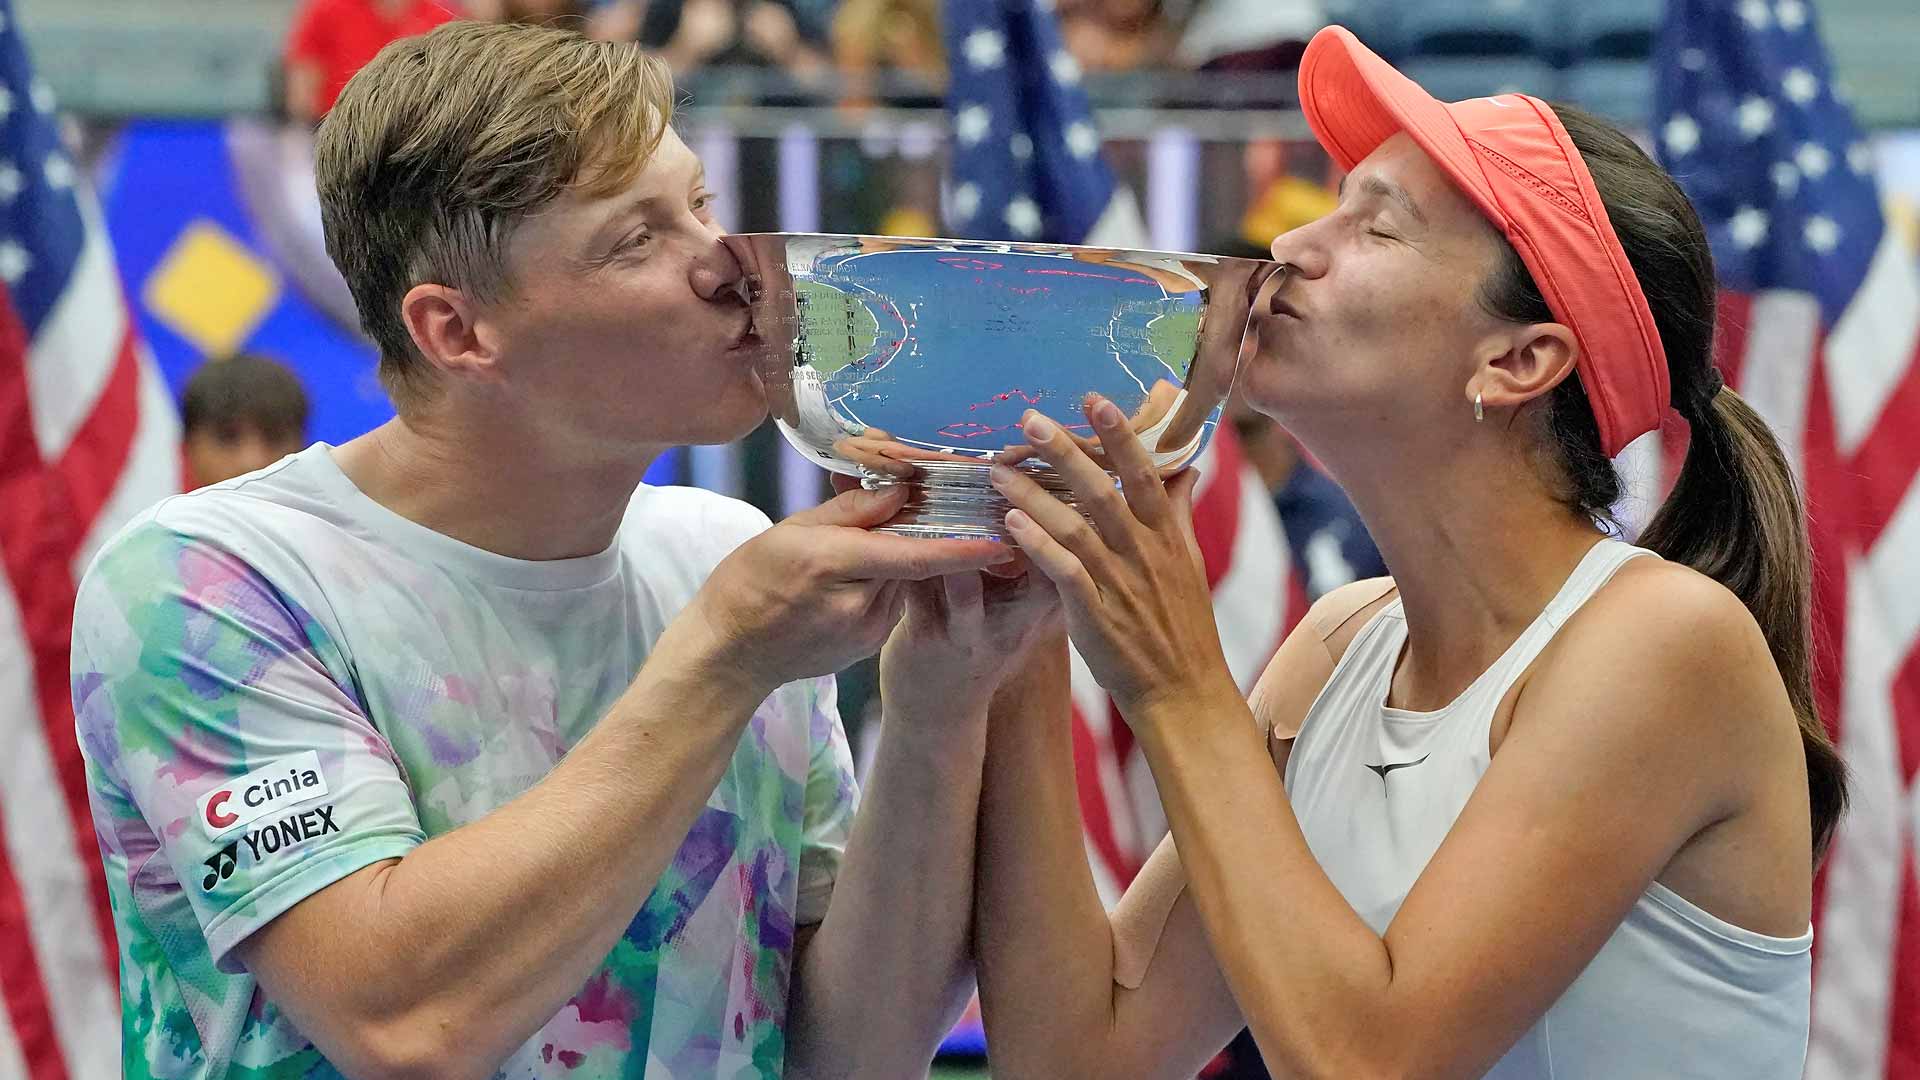 Harri Heliovaara and Anna Danilina lift their maiden Grand Slam trophy on Saturday with victory in the Mixed Doubles at the US Open.